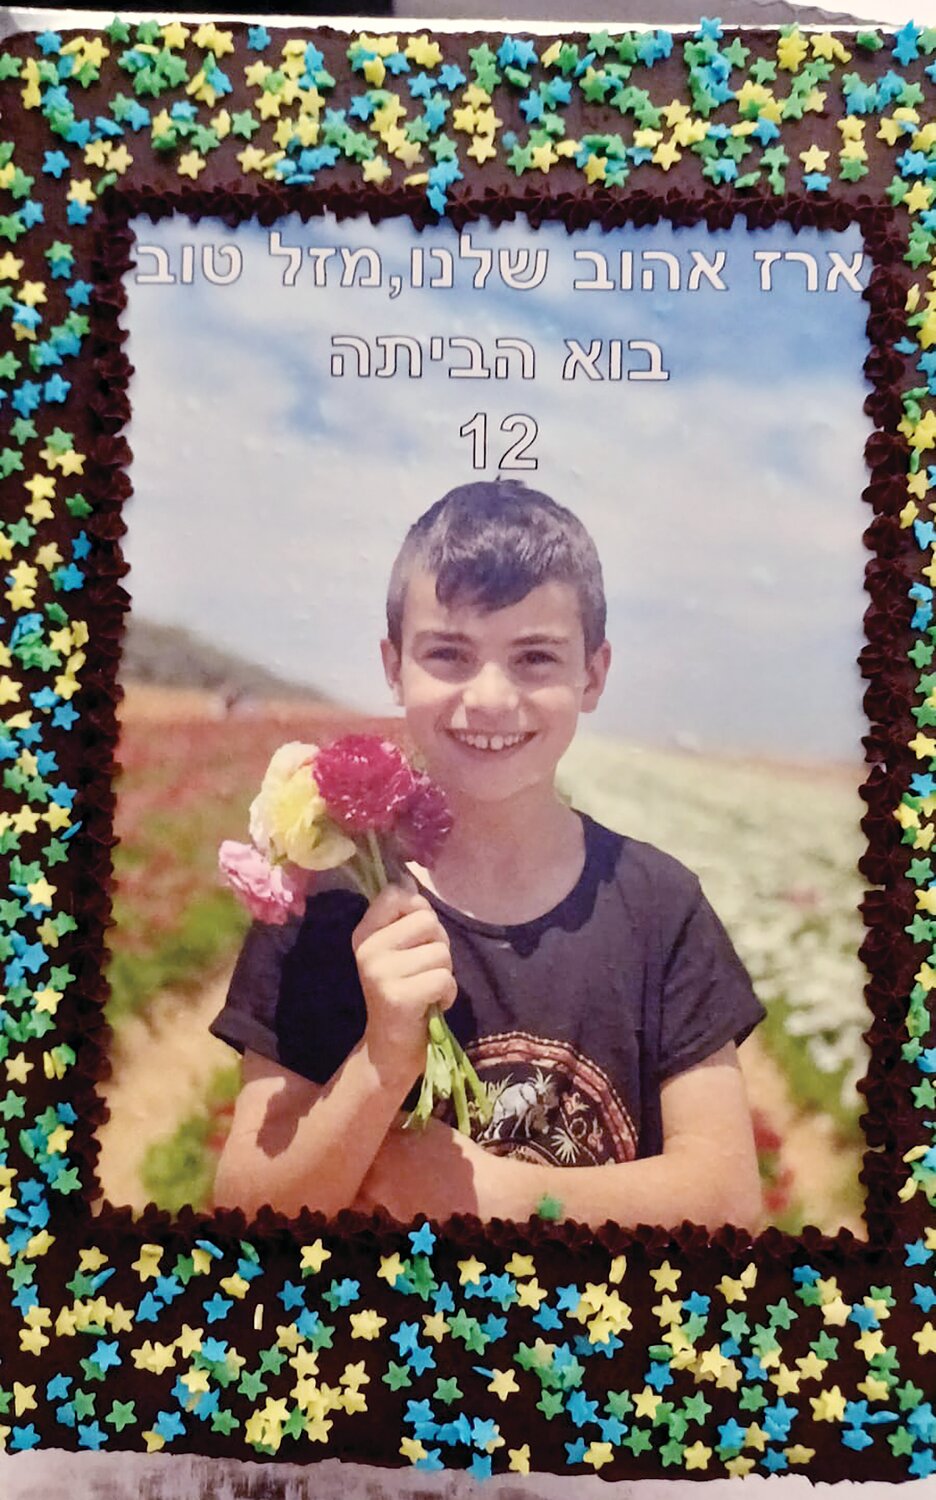 The cake that Hadas Kalderon had made for Erez’s 12th birthday, which she still celebrated with a party and gifts for him during his captivity.